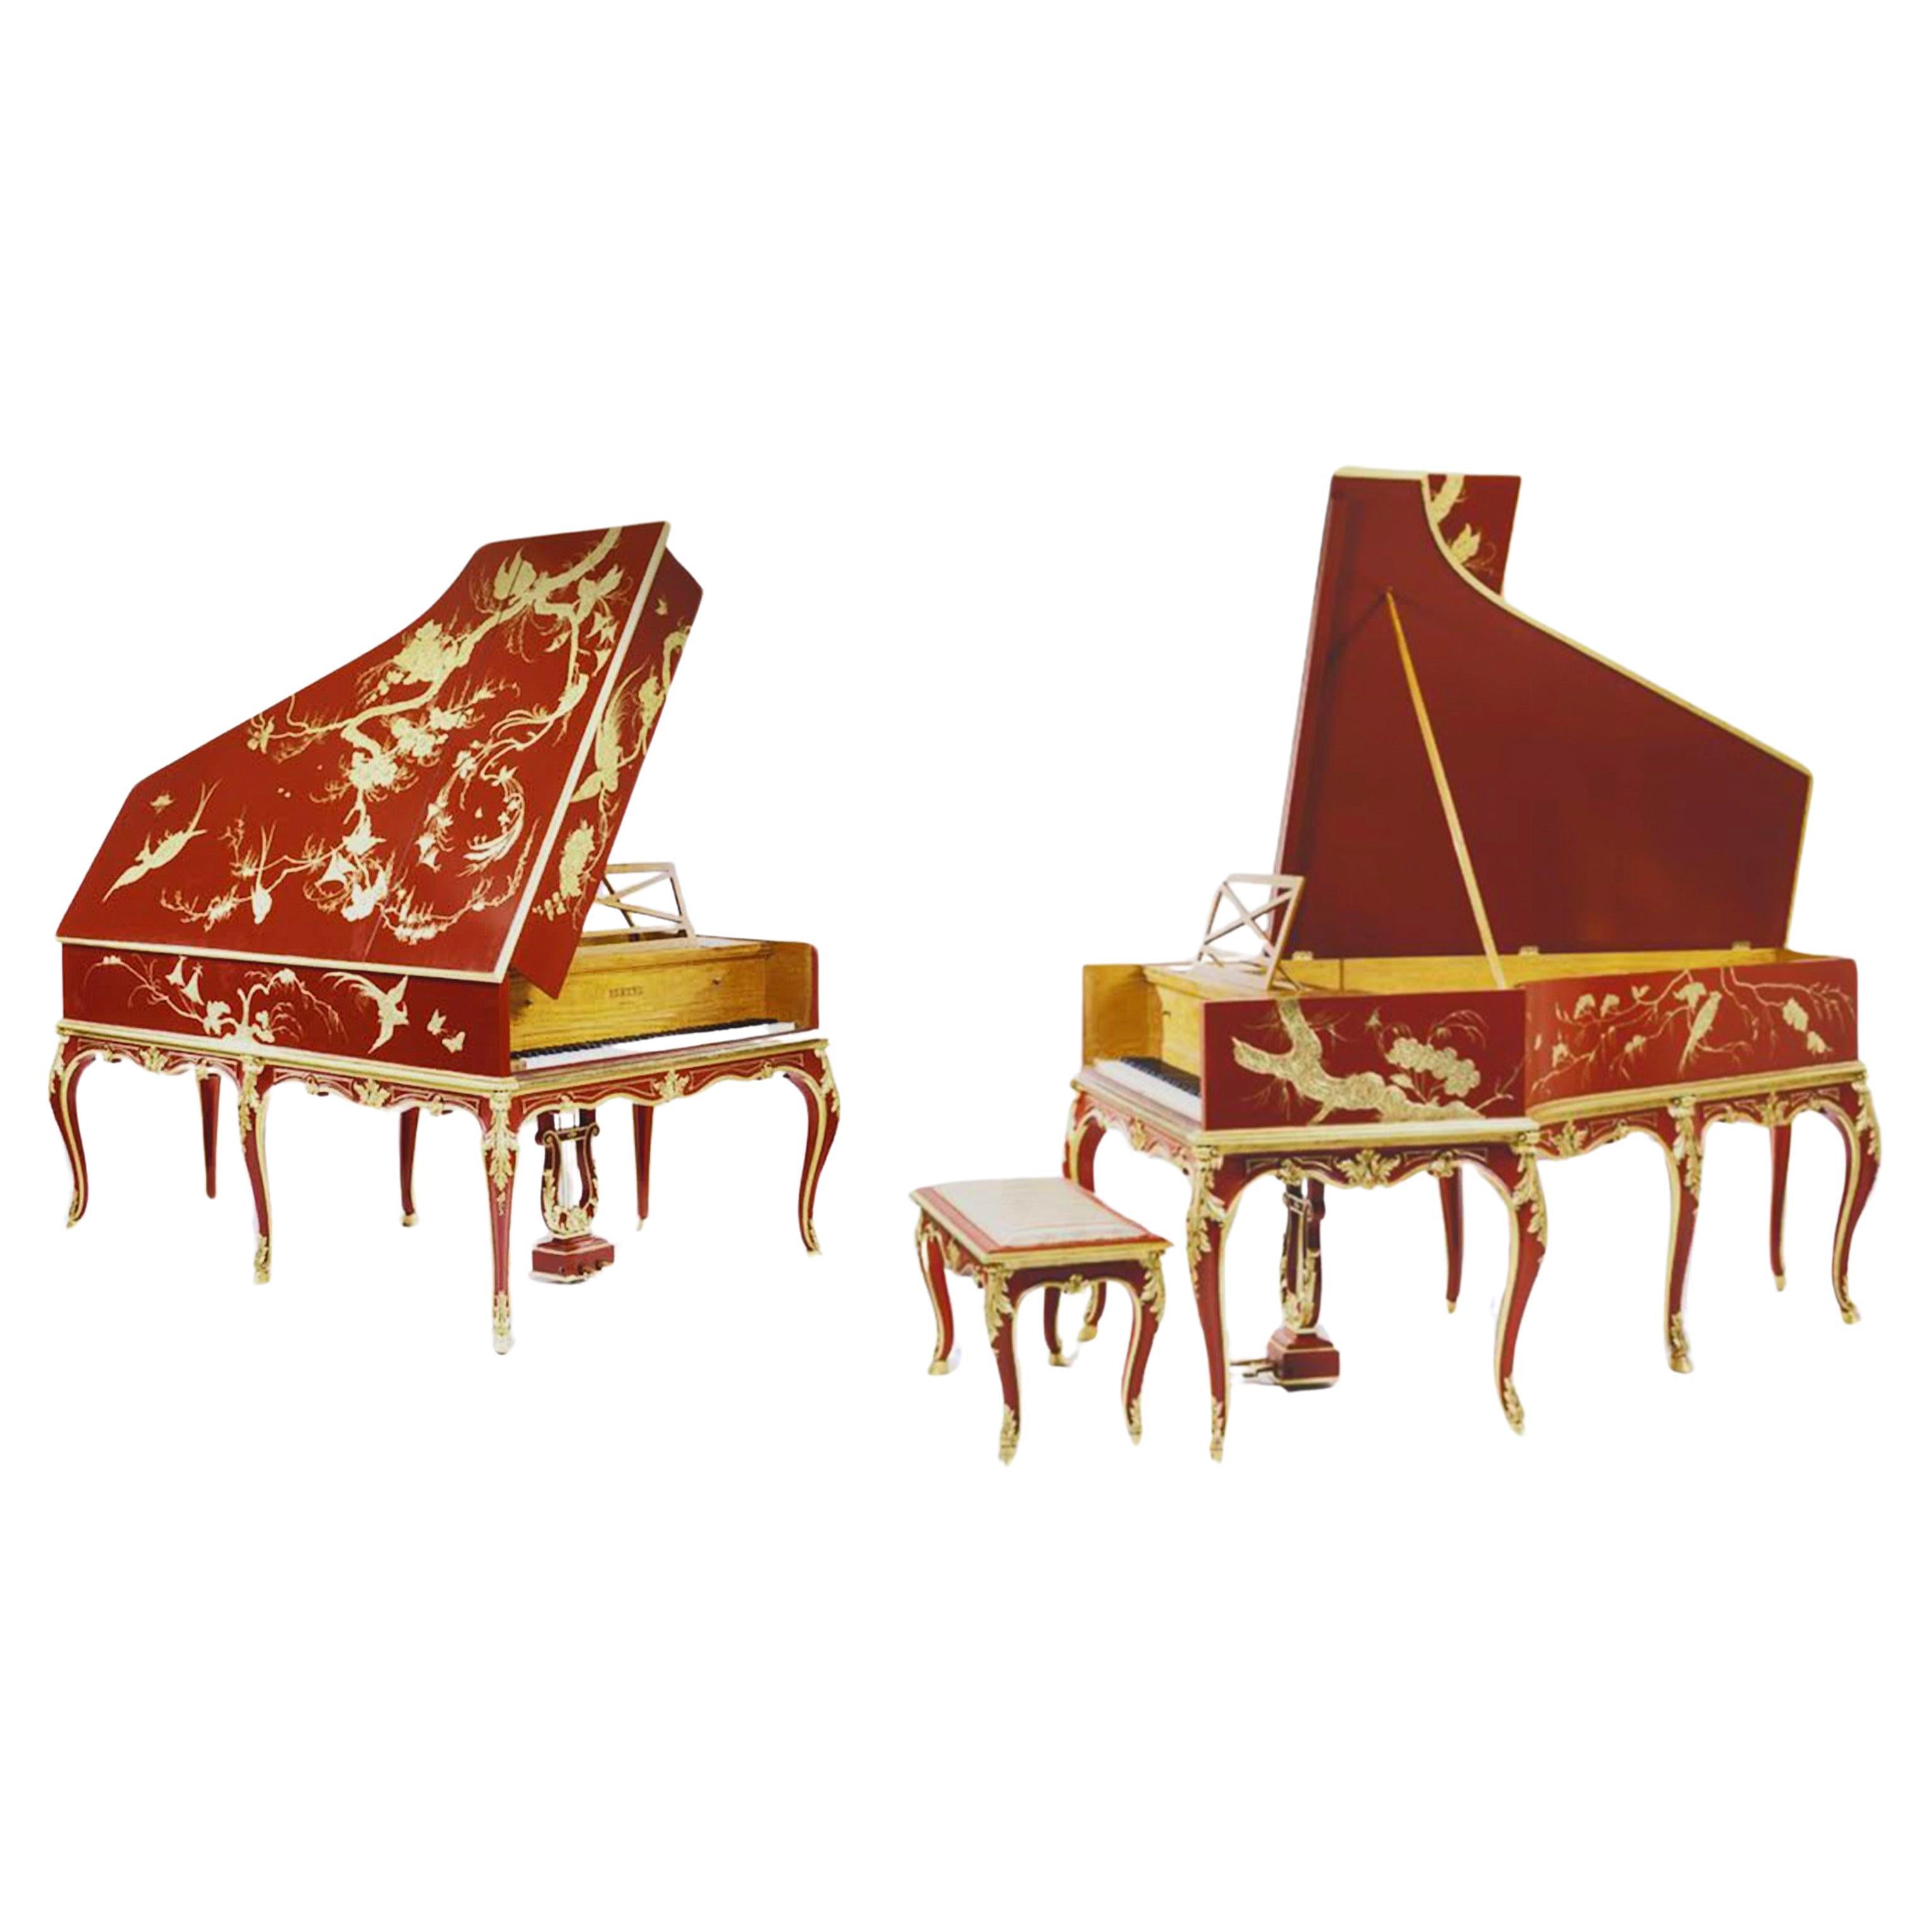 Pleyel Chinoiserie, Louis XV Style with Red Chinese Lacquer & 24 Karat Water Gil For Sale